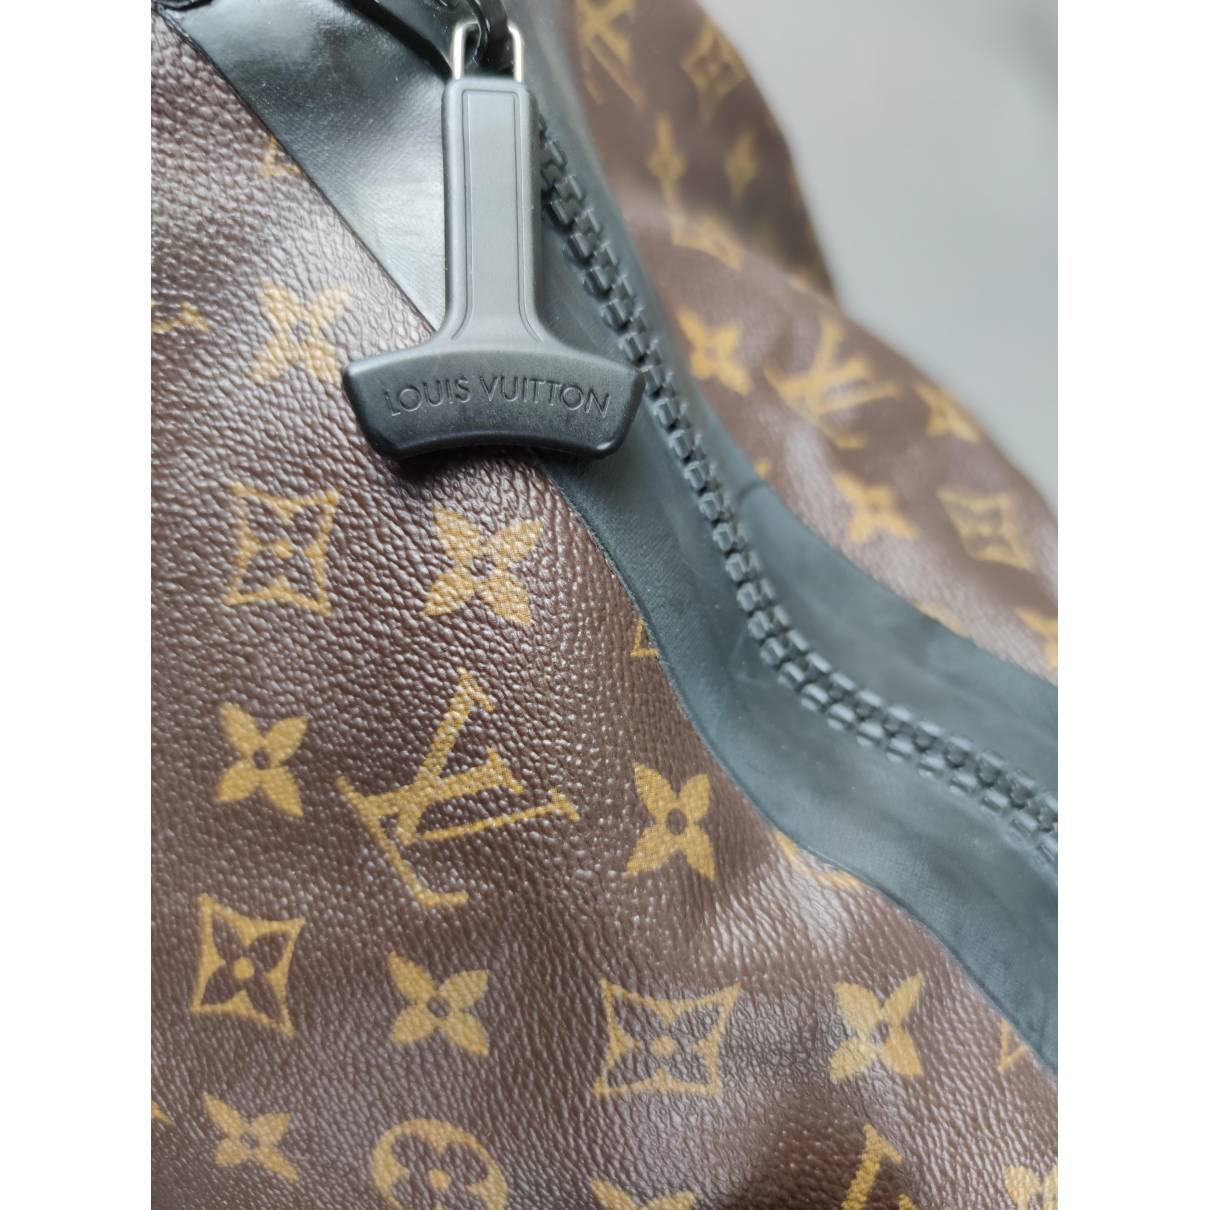 Louis Vuitton, Bags, Authentic Louis Vuitton Cup Waterproof Keepall 55  Bandoliere Travel Duffle Bag